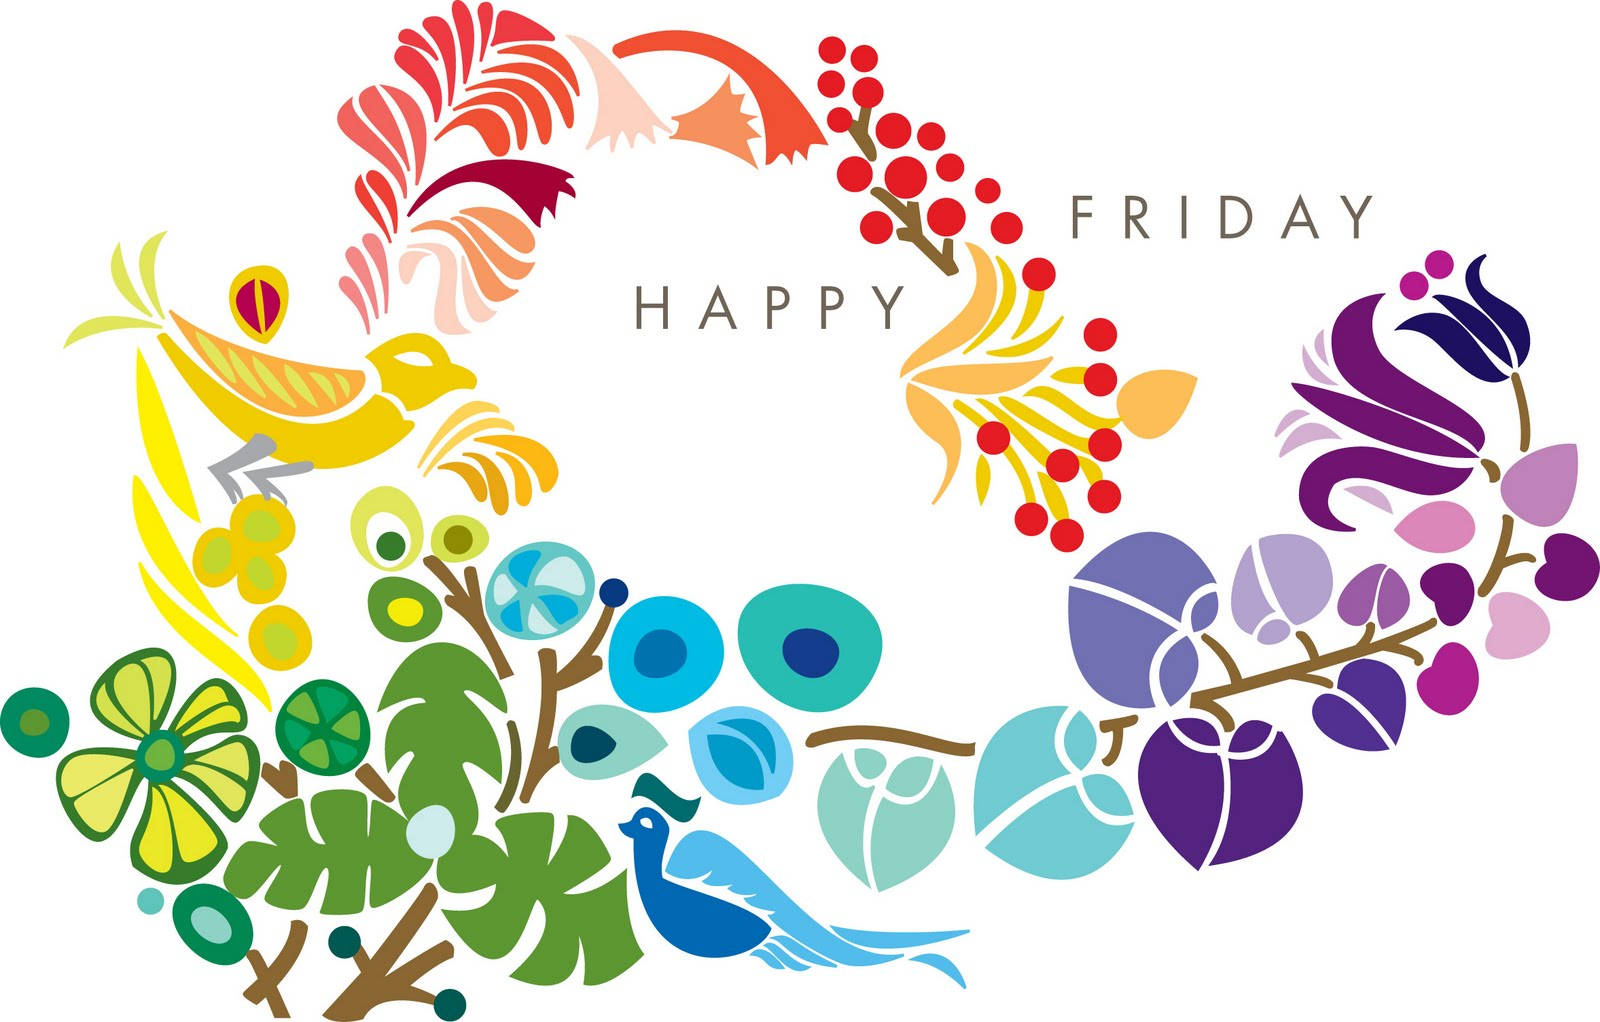 Happy Friday Floral Vector Art Background